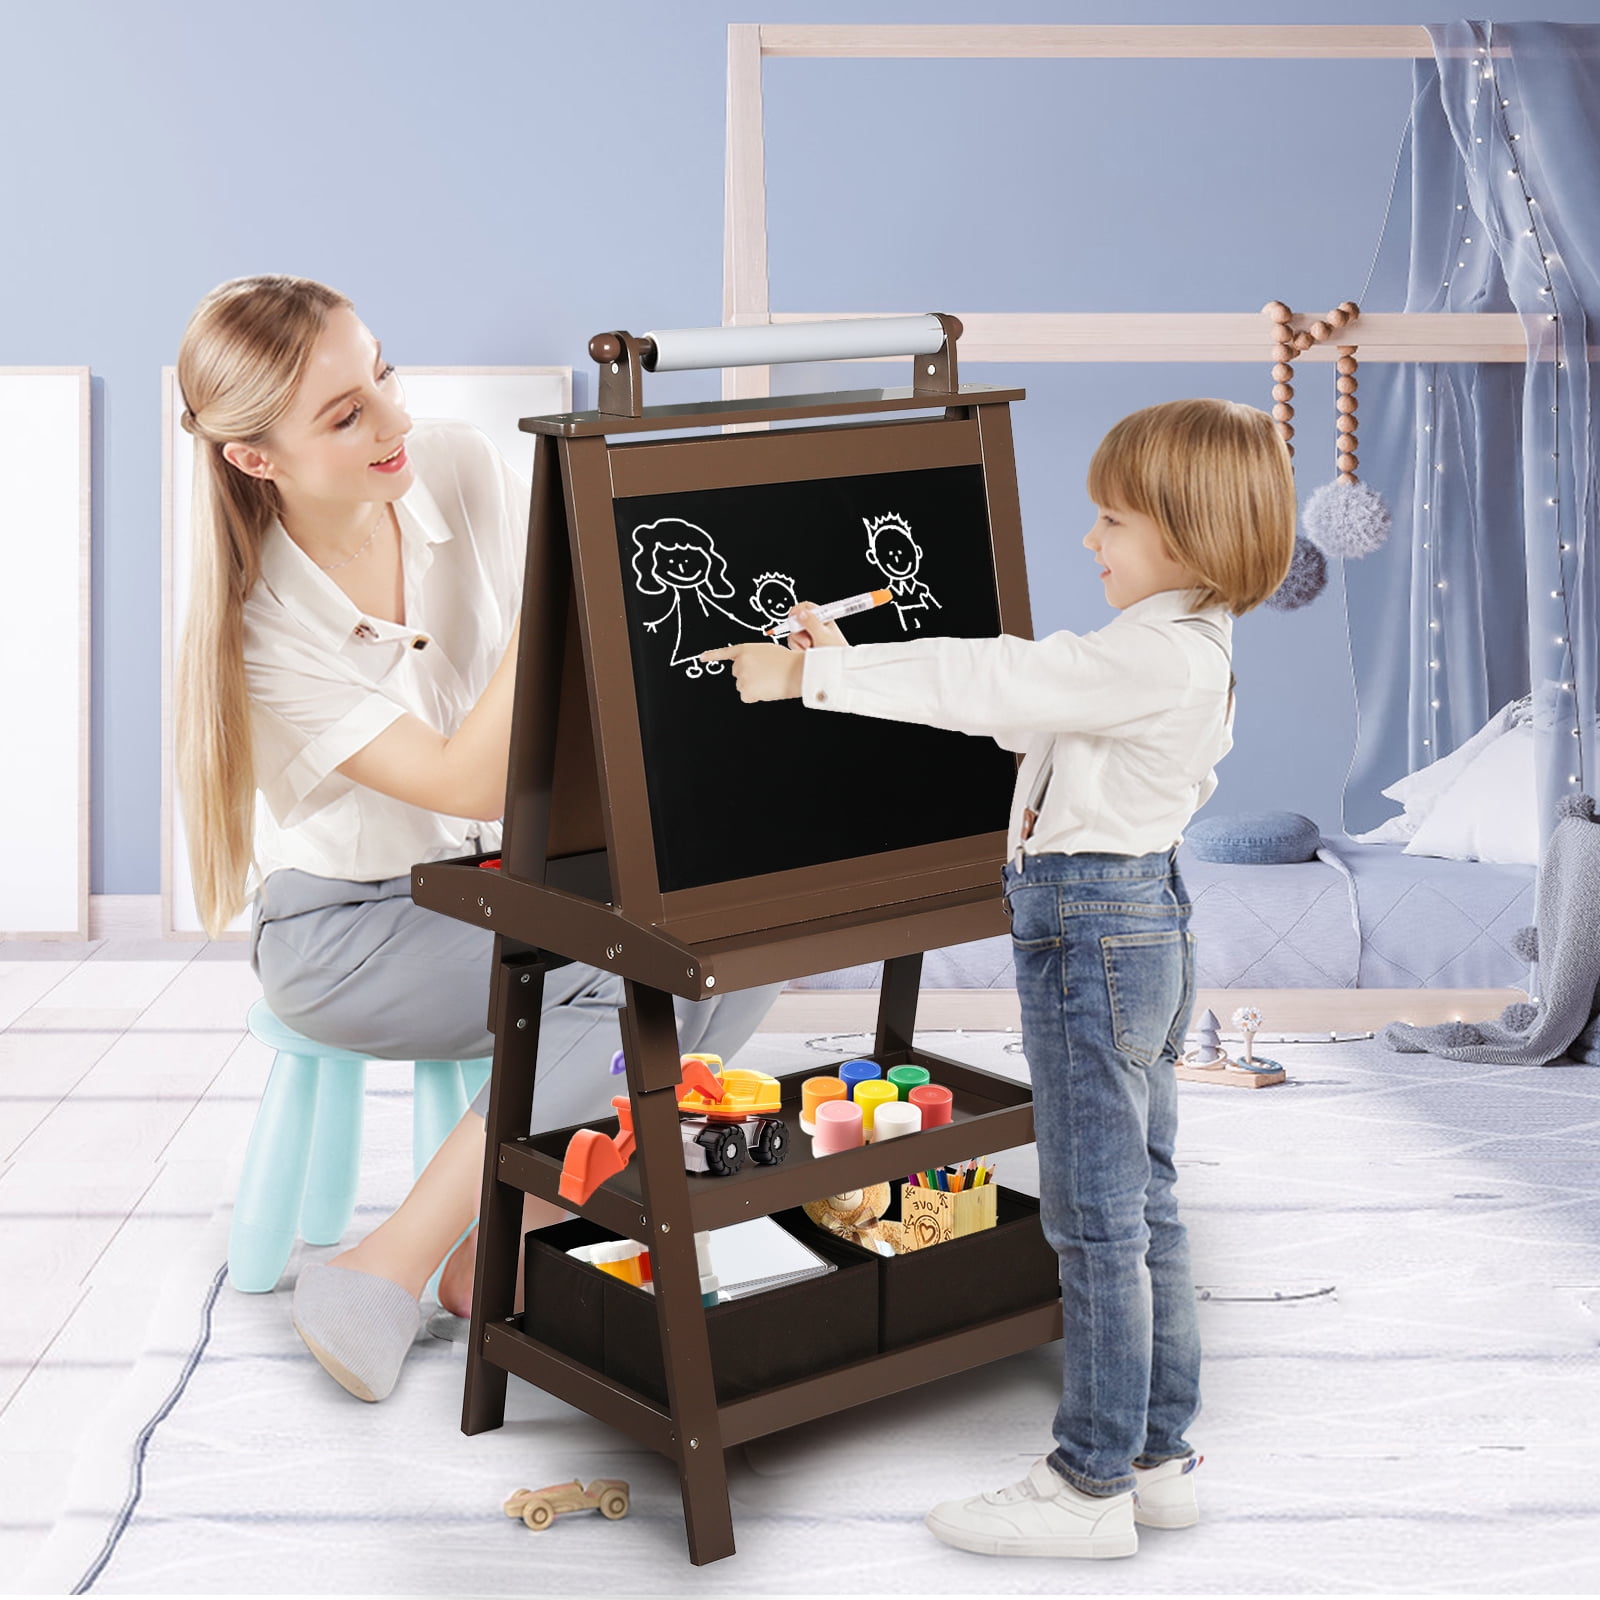 Valentine's Day Ealing Kids Art Easel, Easel For Kids 3 In 1 Kids Easel  With Paper Roll, Adjustable Height Chalkboard & Whiteboard For Kids  Toddlers Birthday Holiday Gifts.